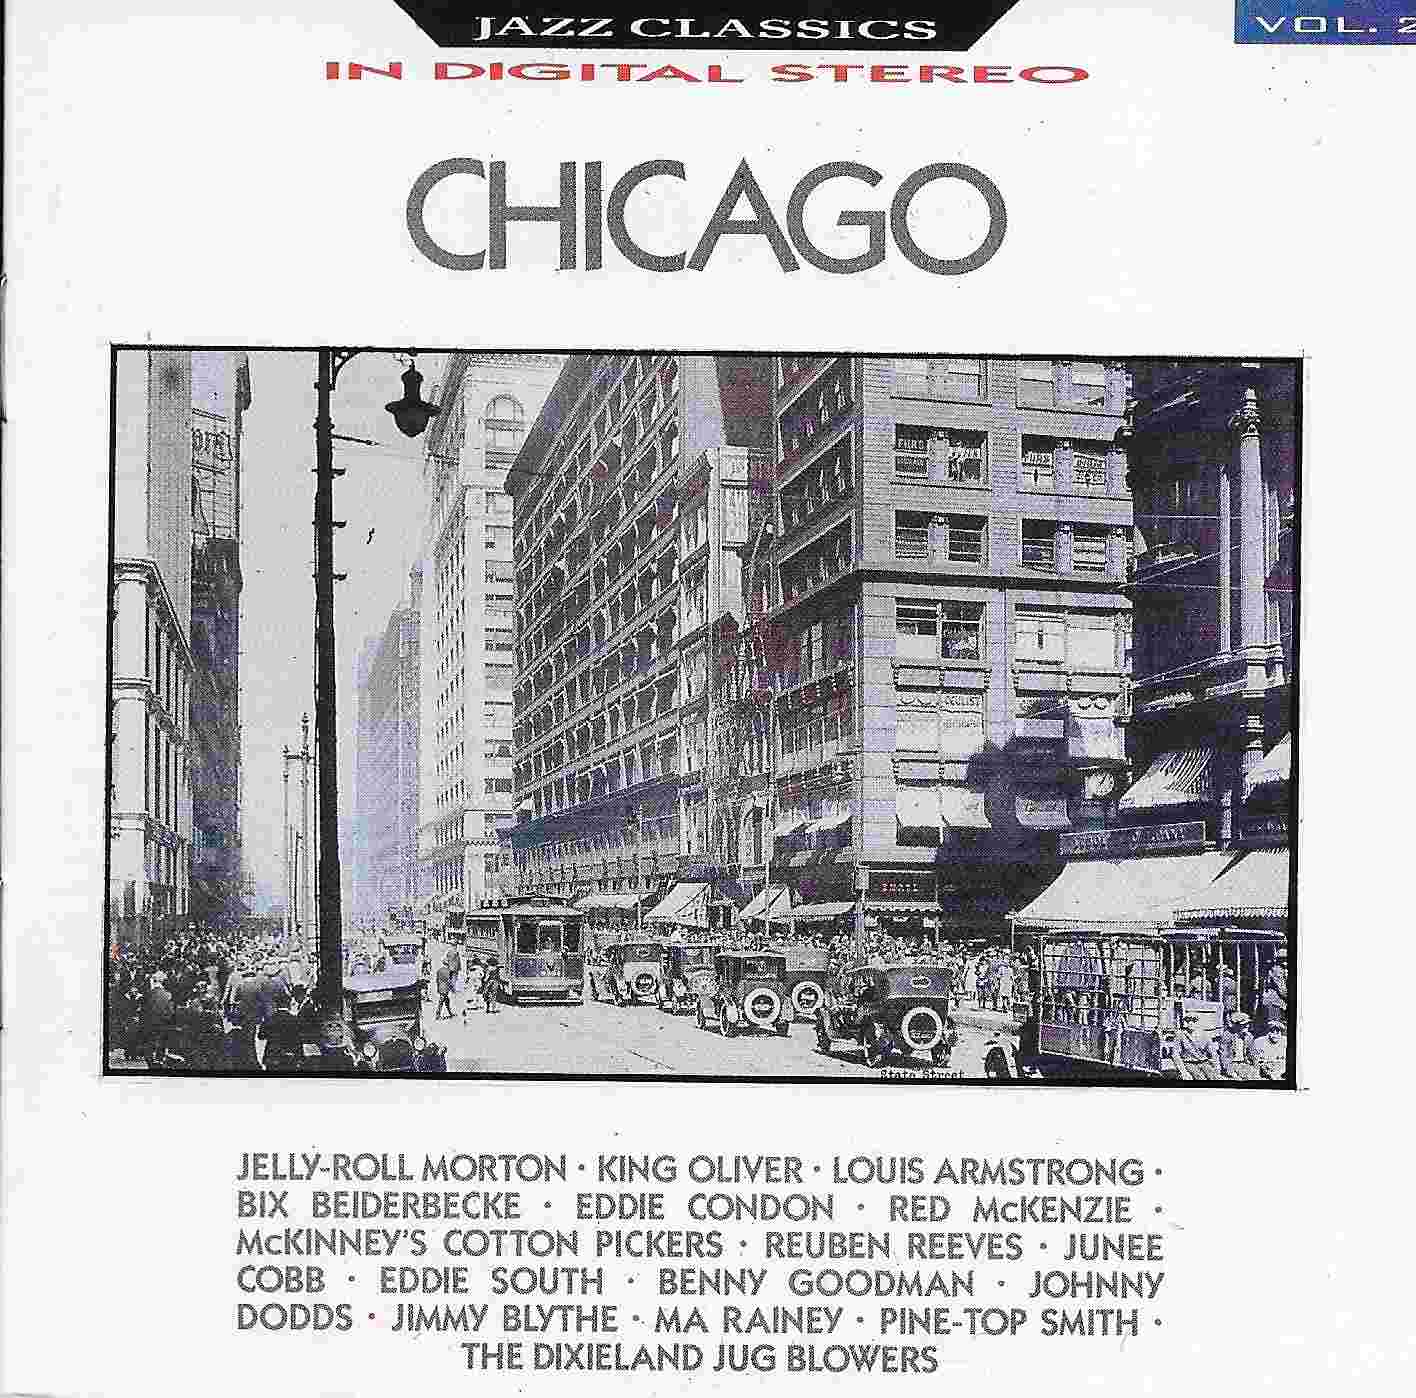 Picture of BBCCD589 Jazz Classics - Volume 2, Chicago by artist Various from the BBC cds - Records and Tapes library